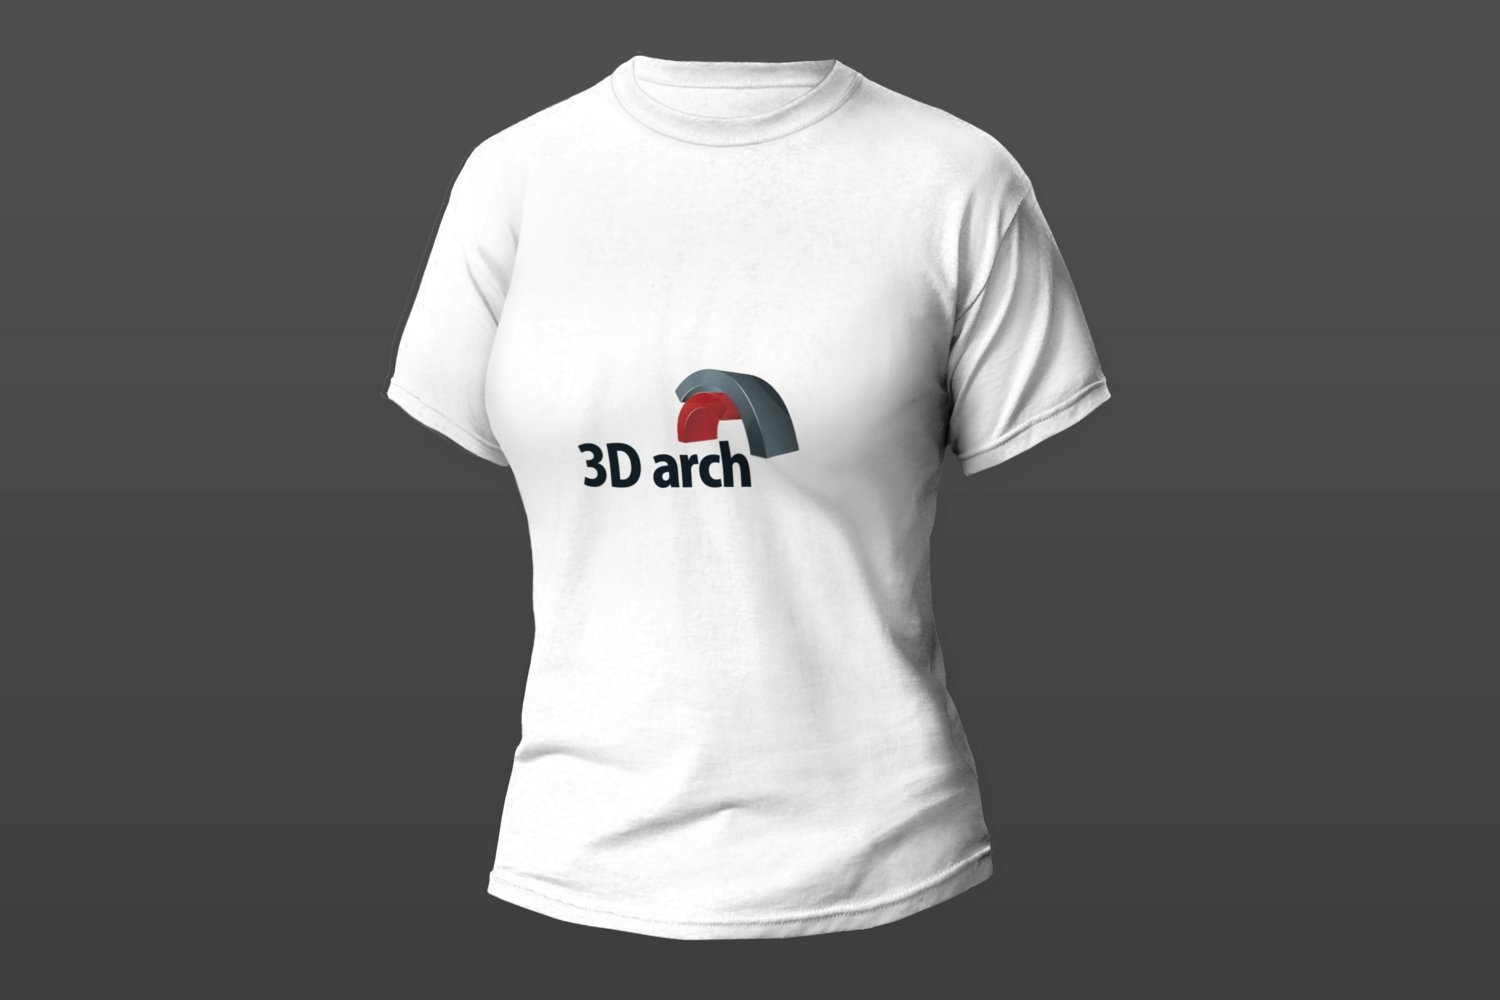 3D Arch design with white T-shirt mockup.